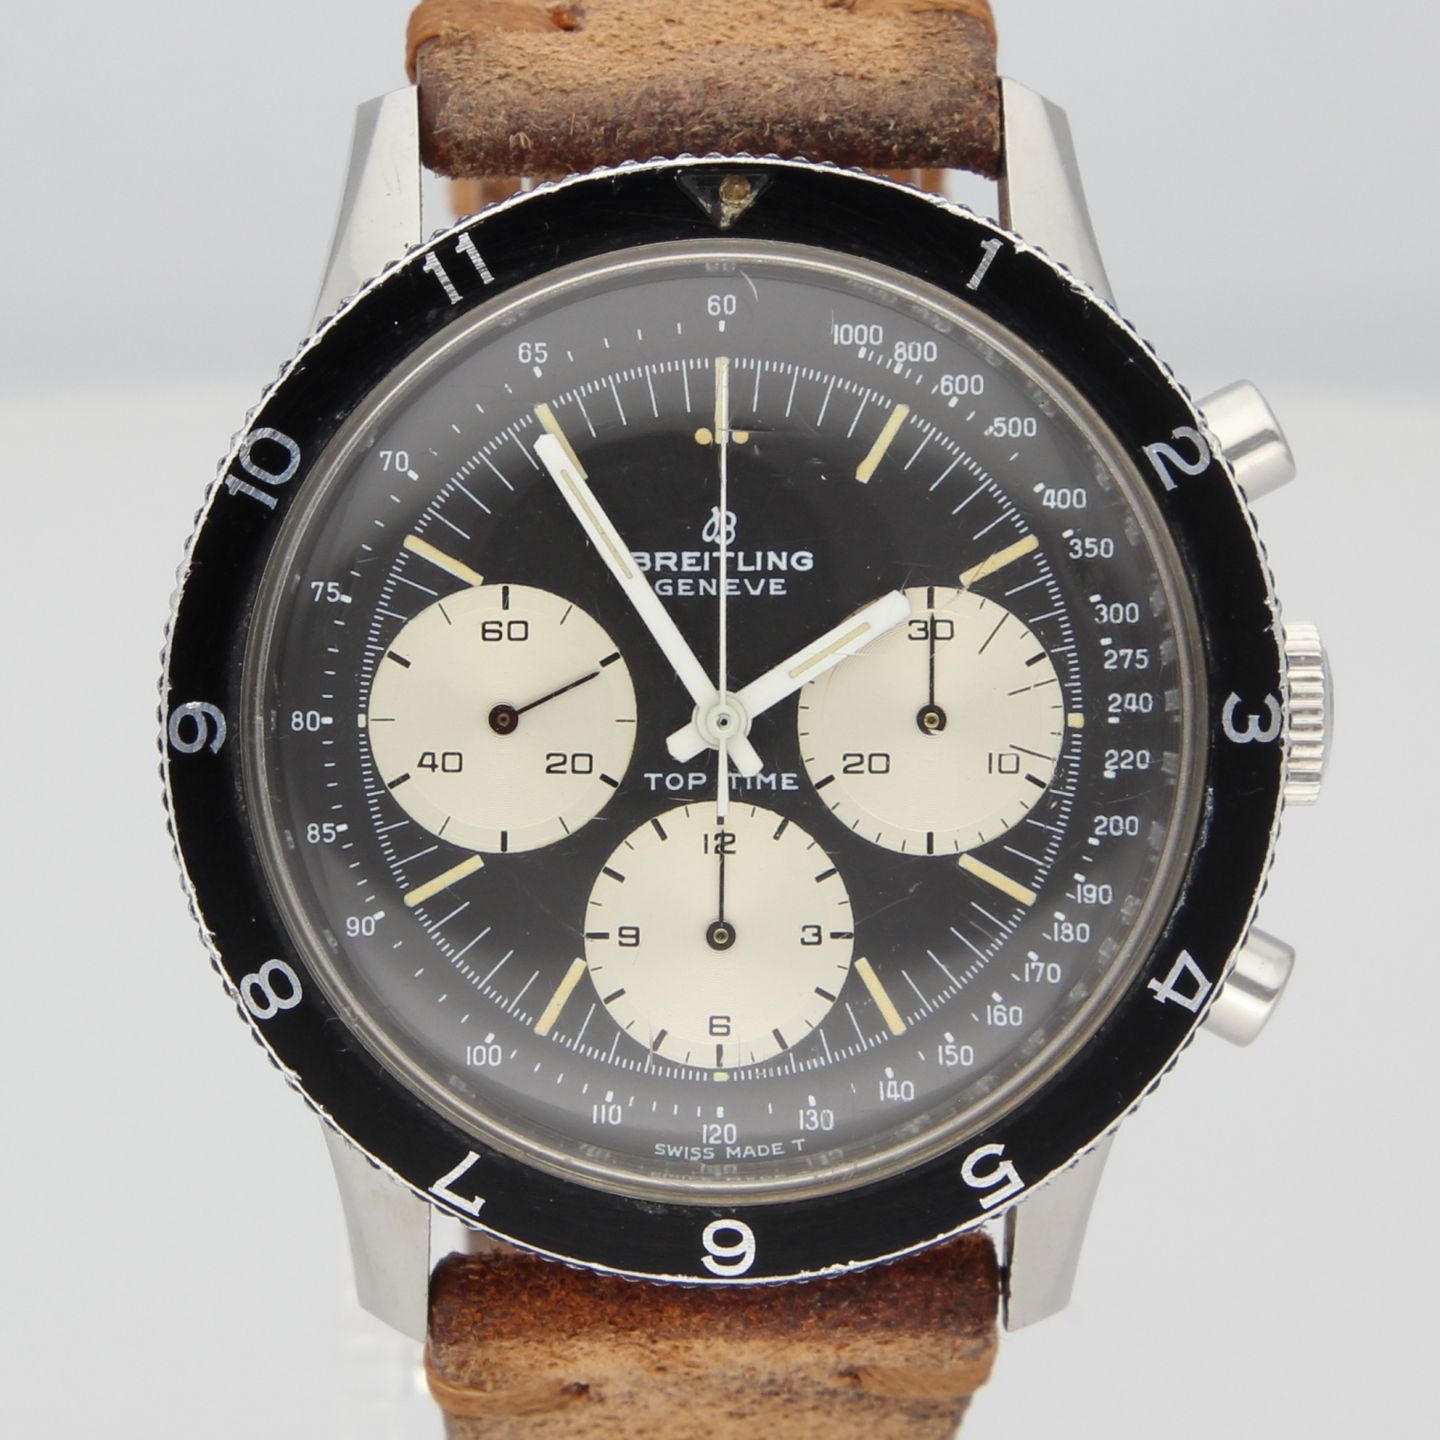 Breitling Top Time 1765 - (1/8)